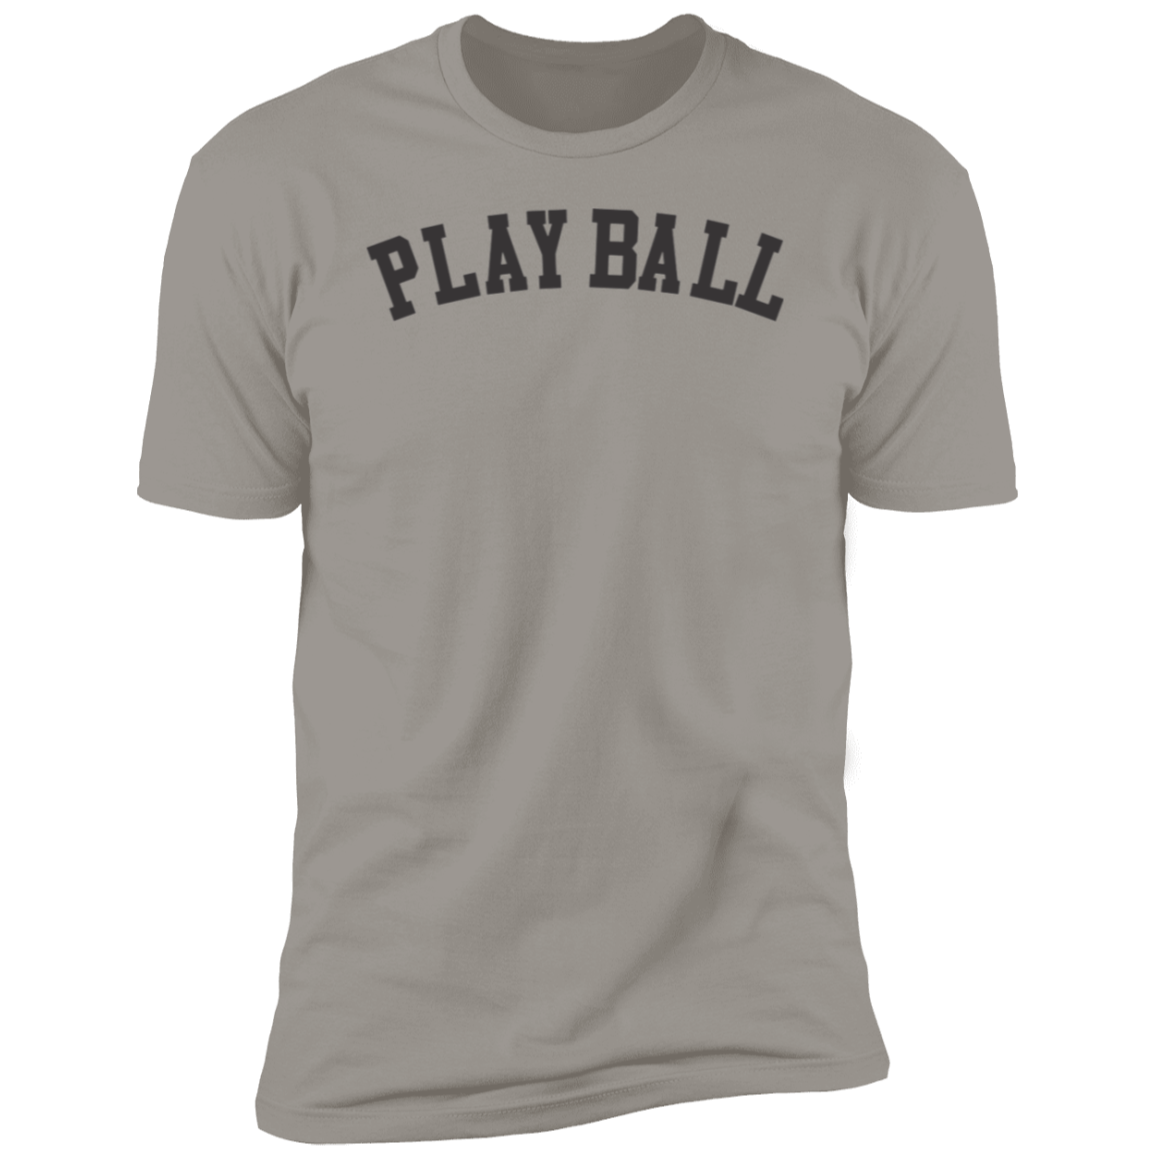 The Playball Premium Men's Tee - Game Day Getup